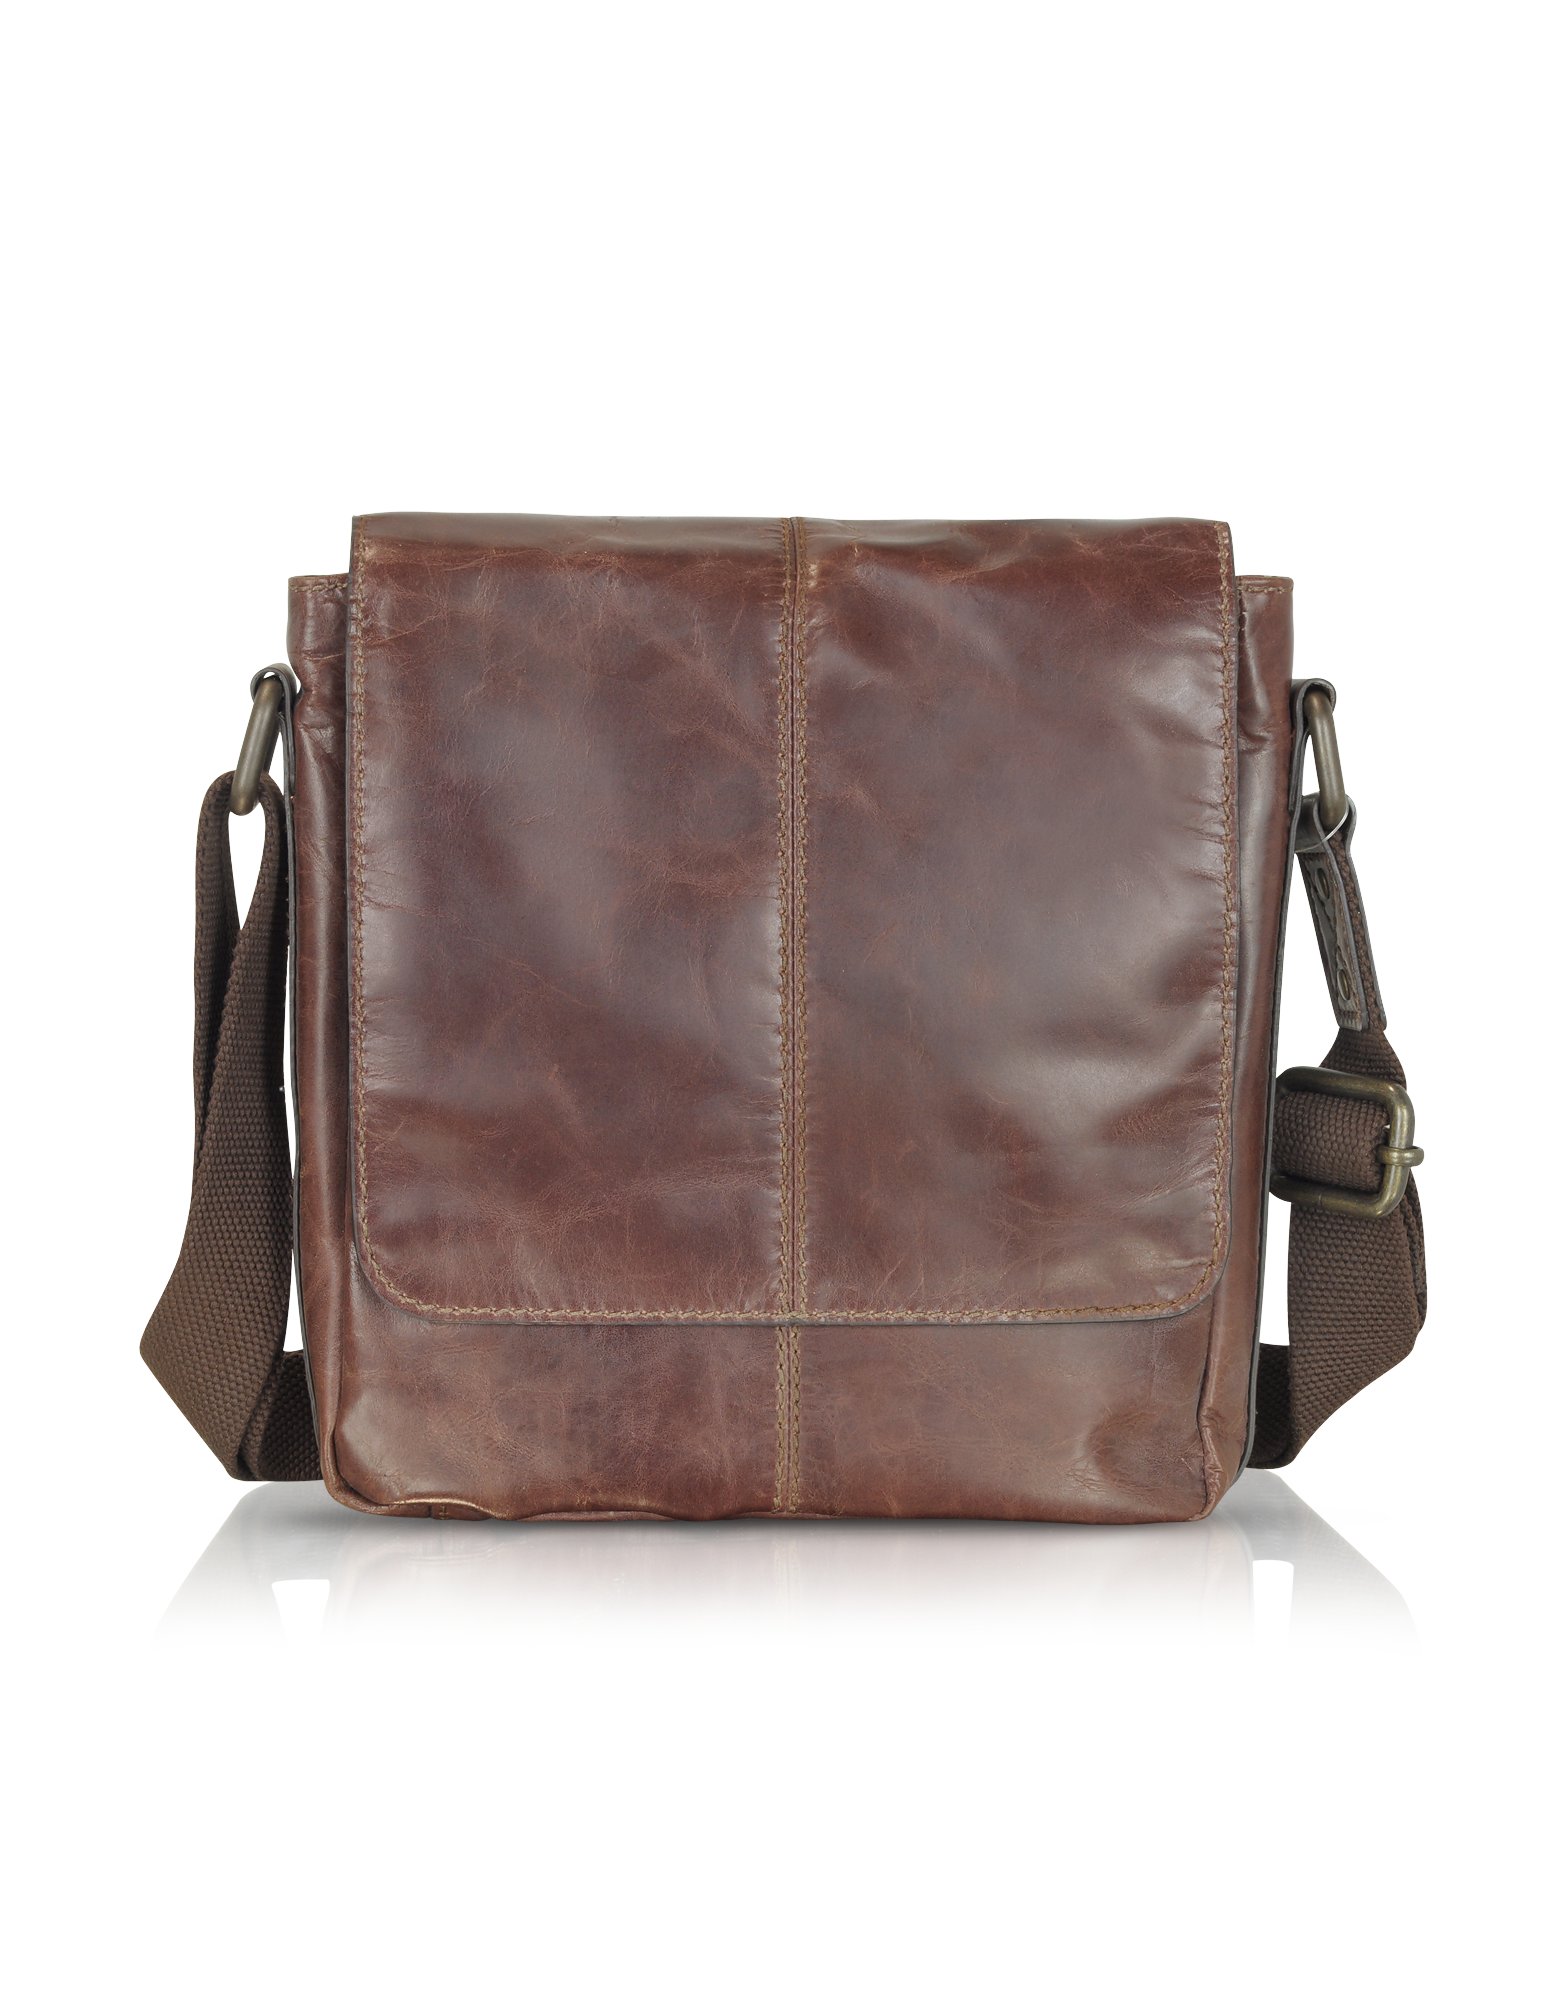 Lyst - Fossil Jackson - Bomber Leather City Bag in Brown for Men